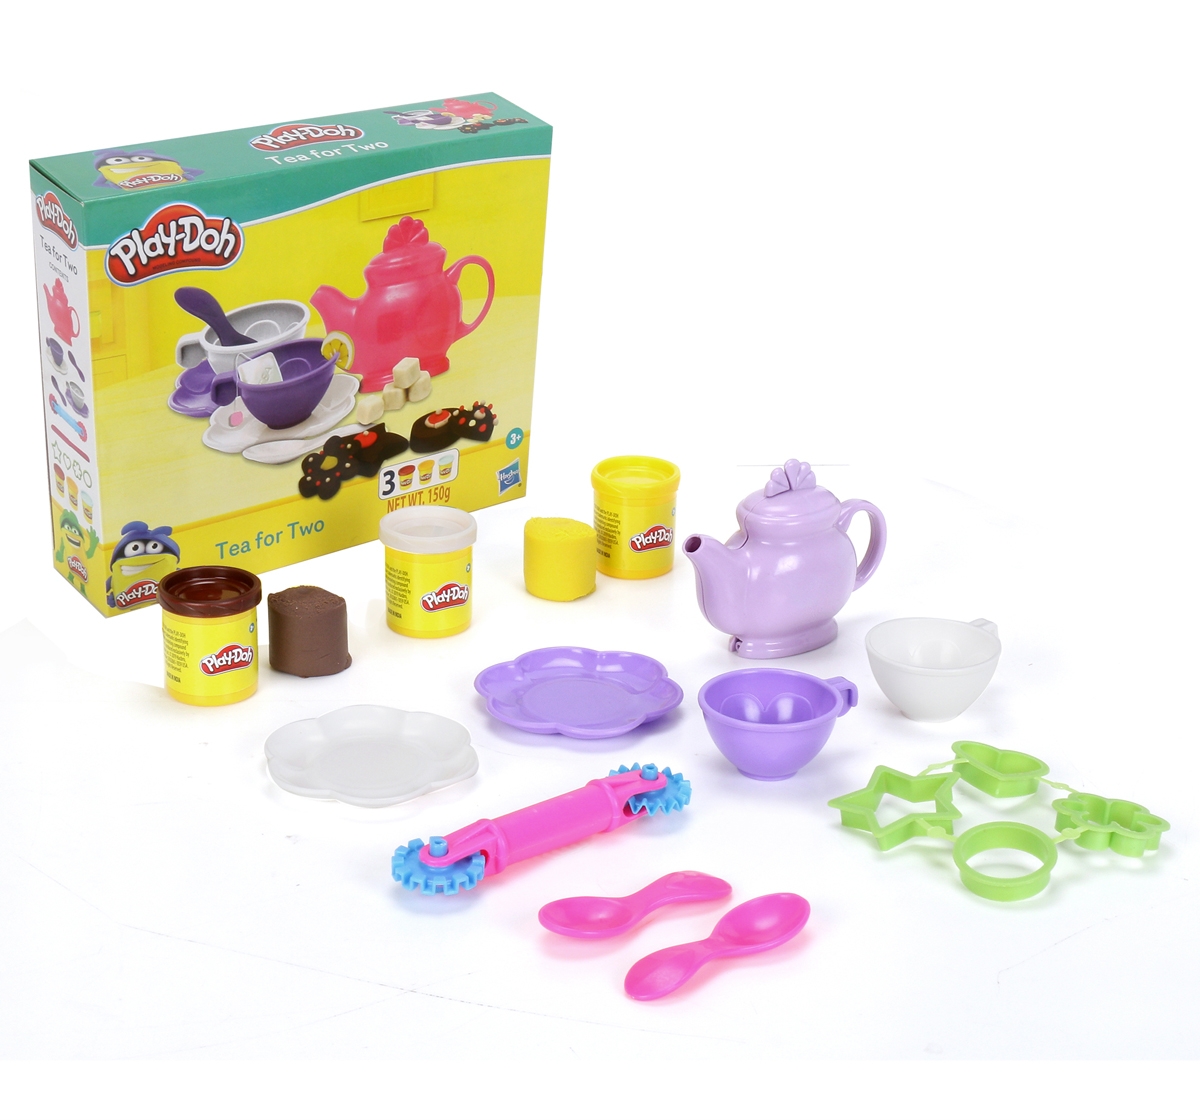 Play-Doh | Play Doh Tea for Two Playset for Kids 3Y+, Multicolour